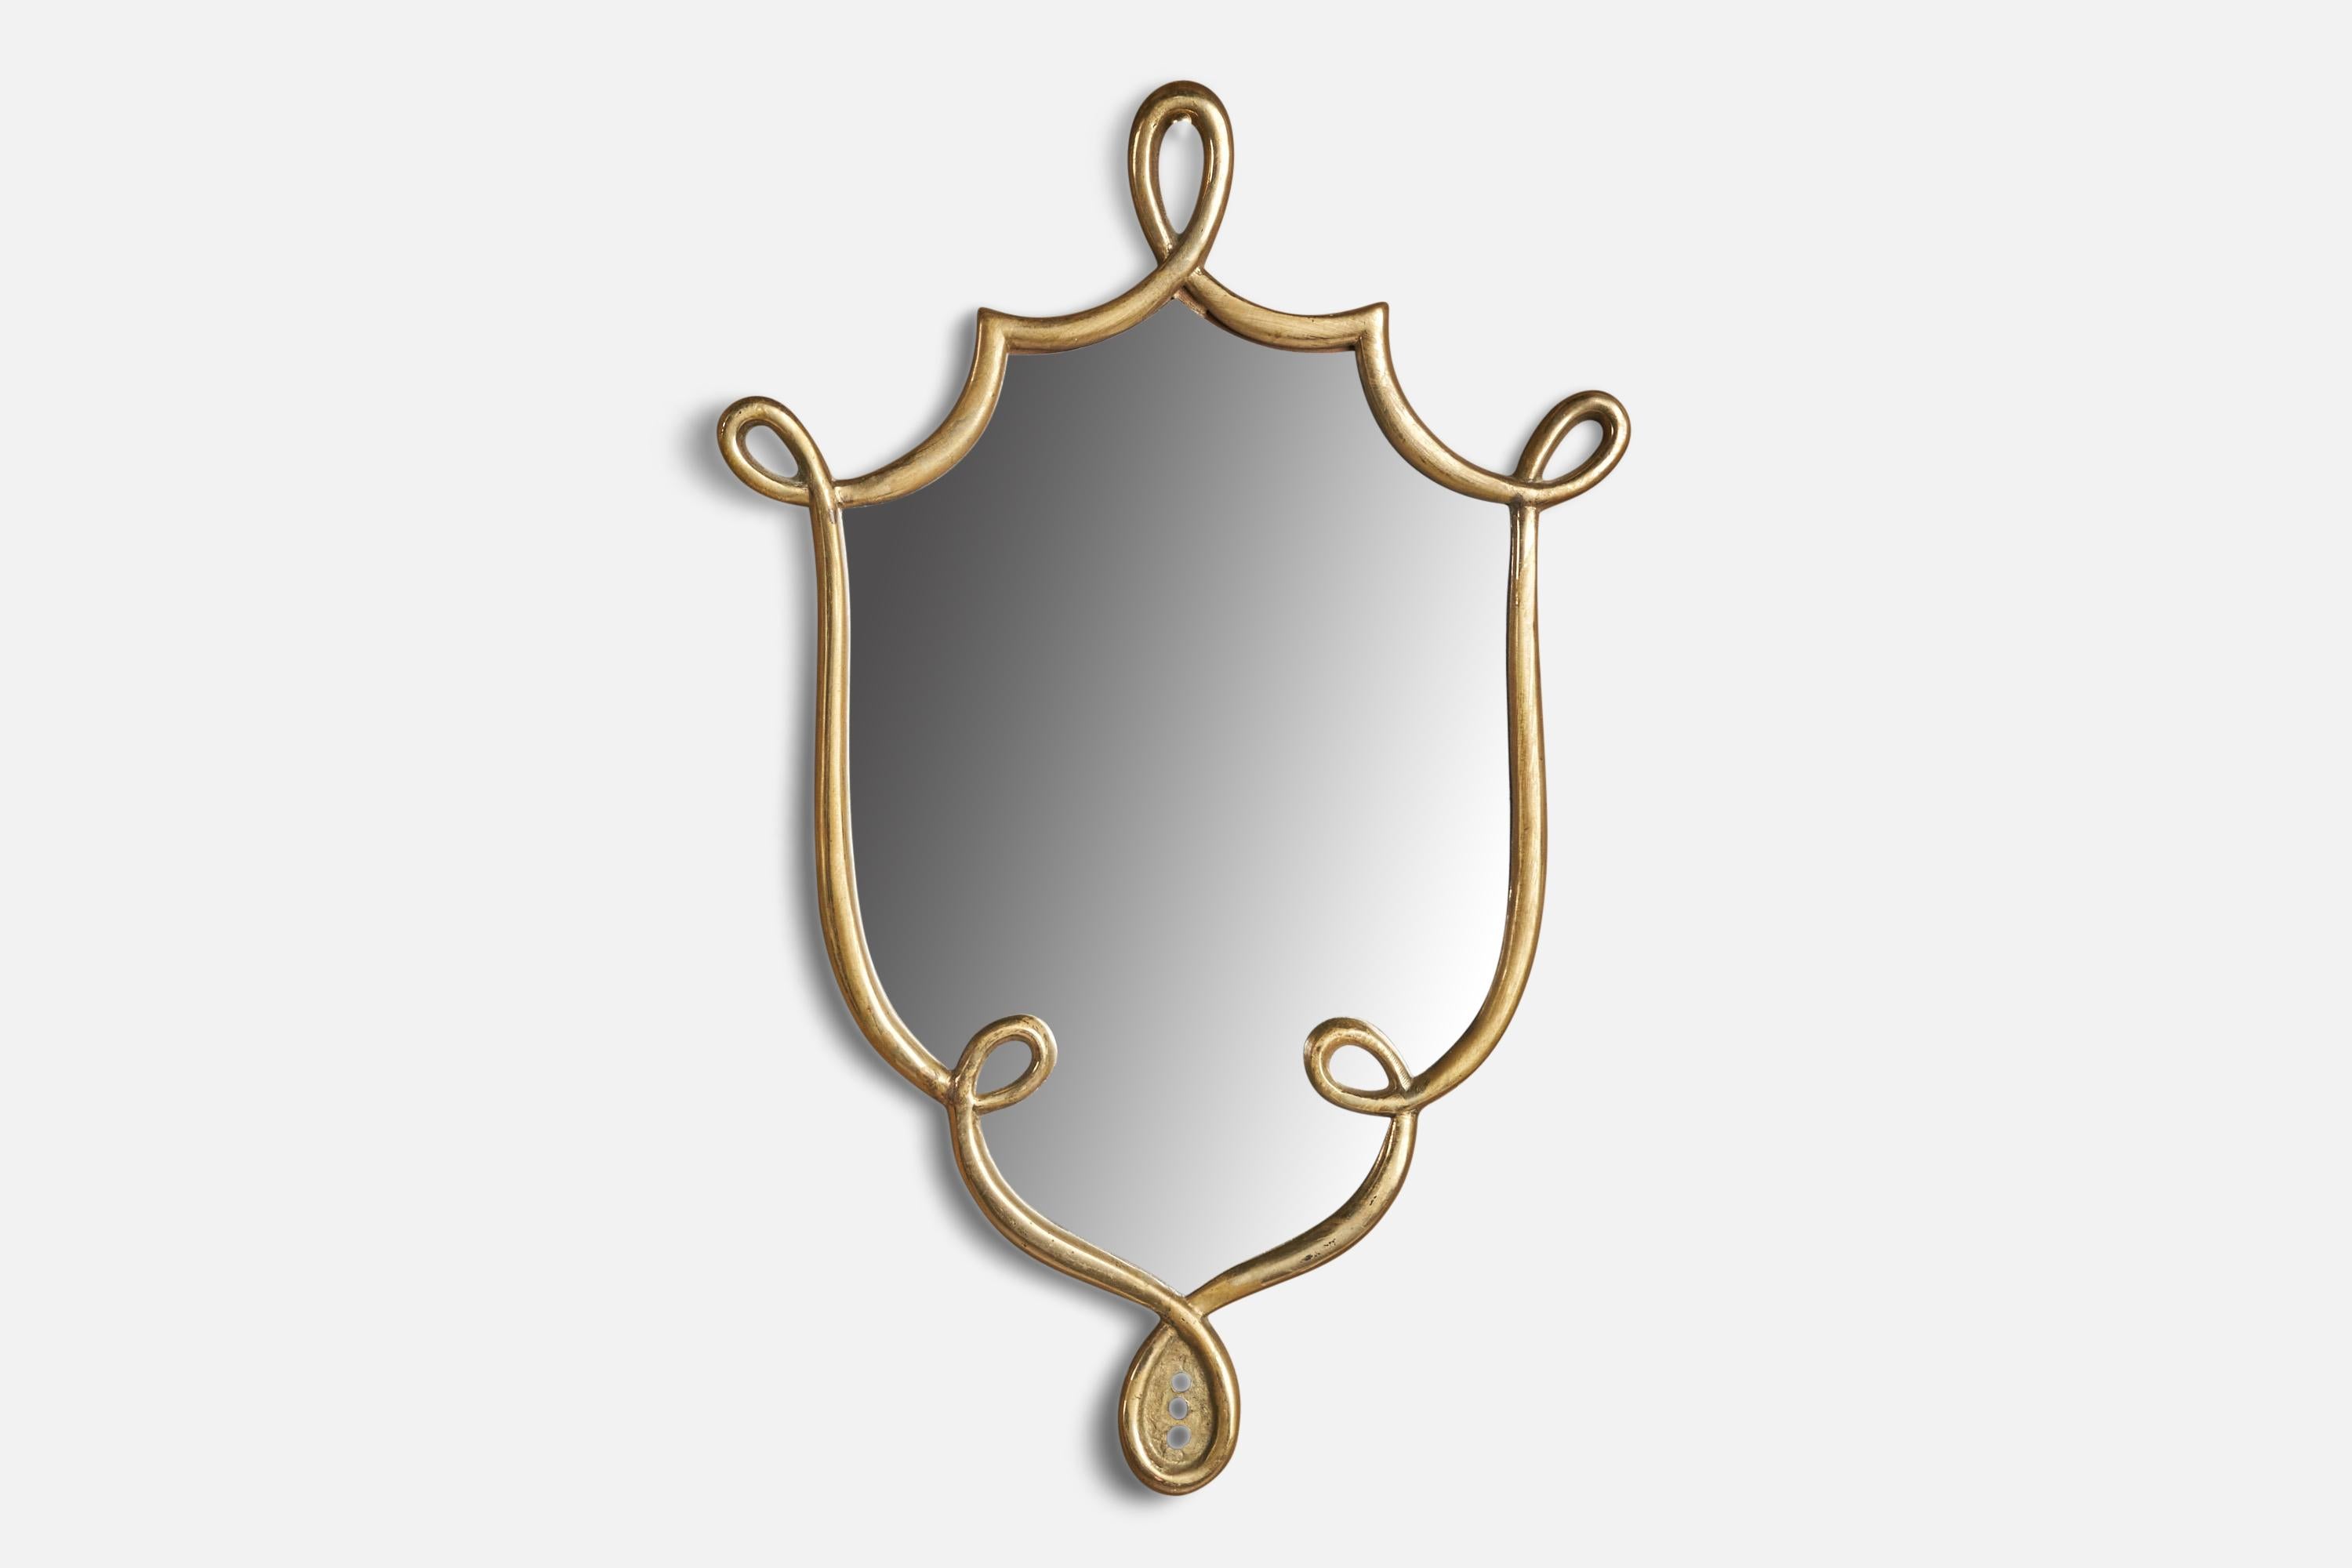 A brass wall mirror designed and produced in Italy, 1930s.